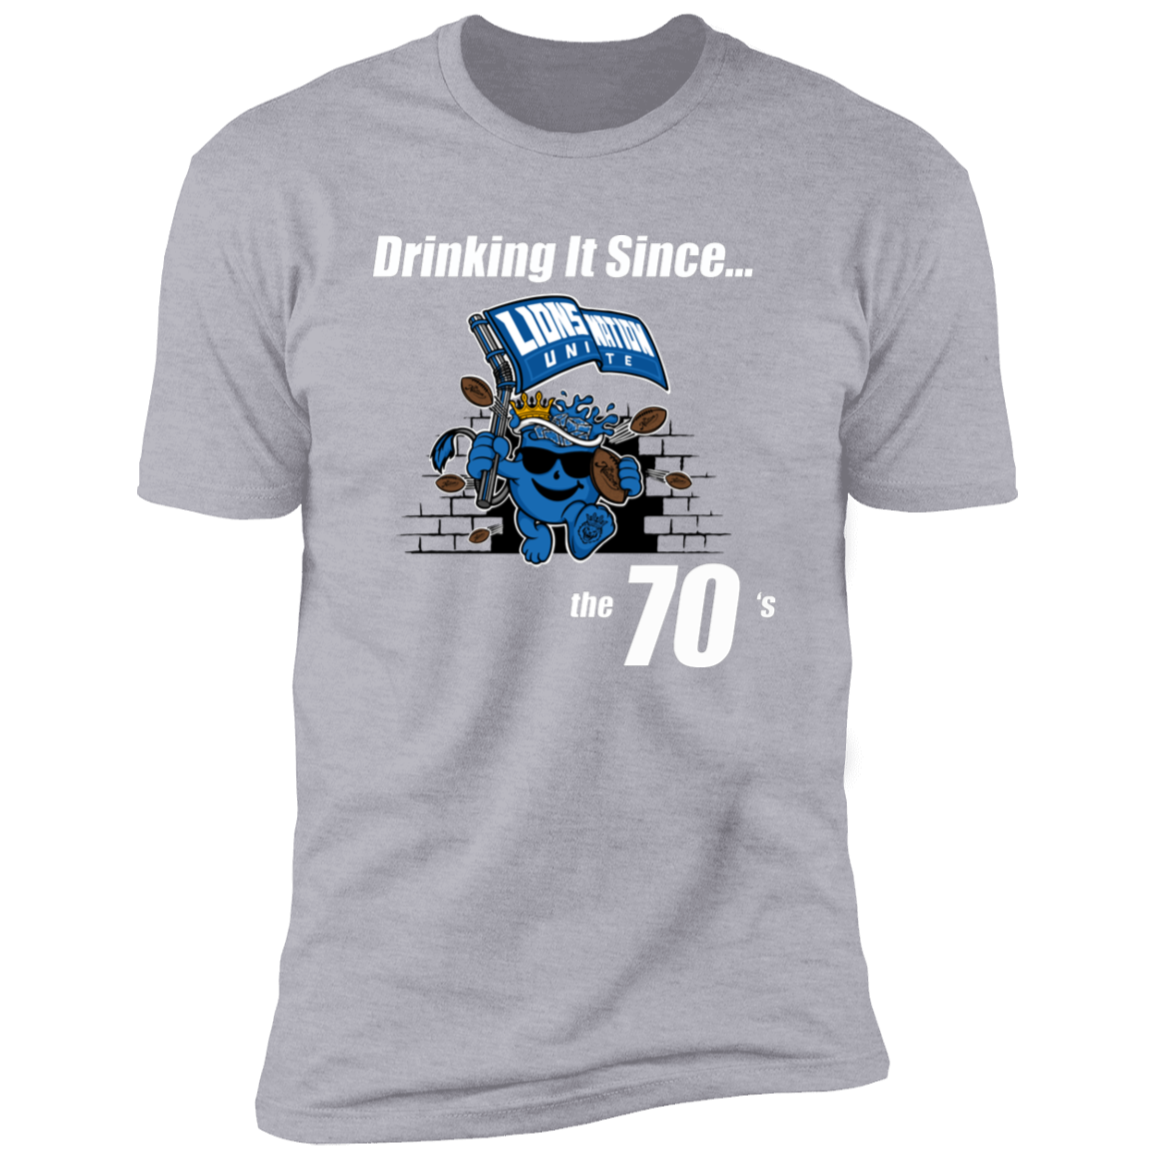 Drinking It Since the 70's Men's T-Shirt